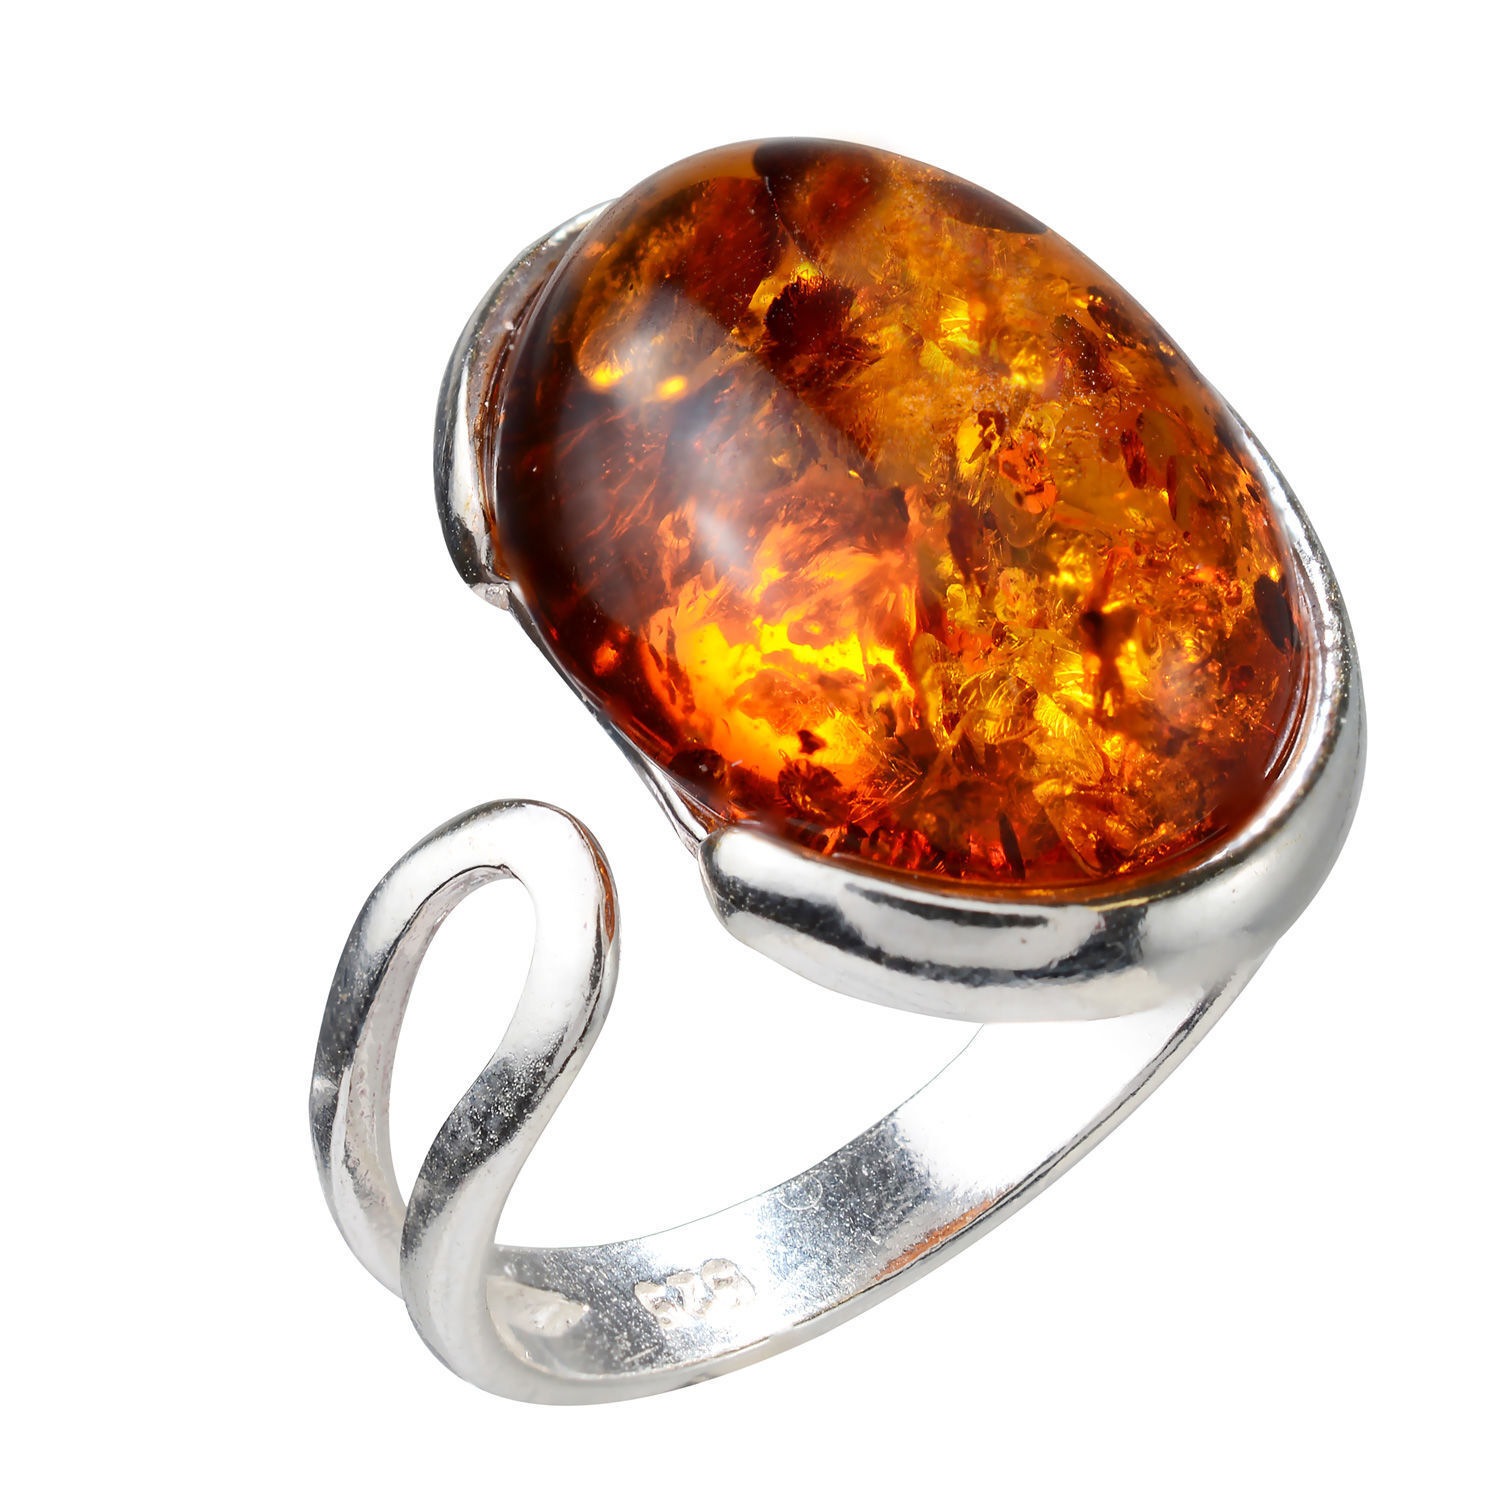 Sterling Silver Amber Ring Genuine Amber Romantic Stone Gift Baltic Amber Jewelry Natural Baltic Honey Amber Ring Women's Jewelry